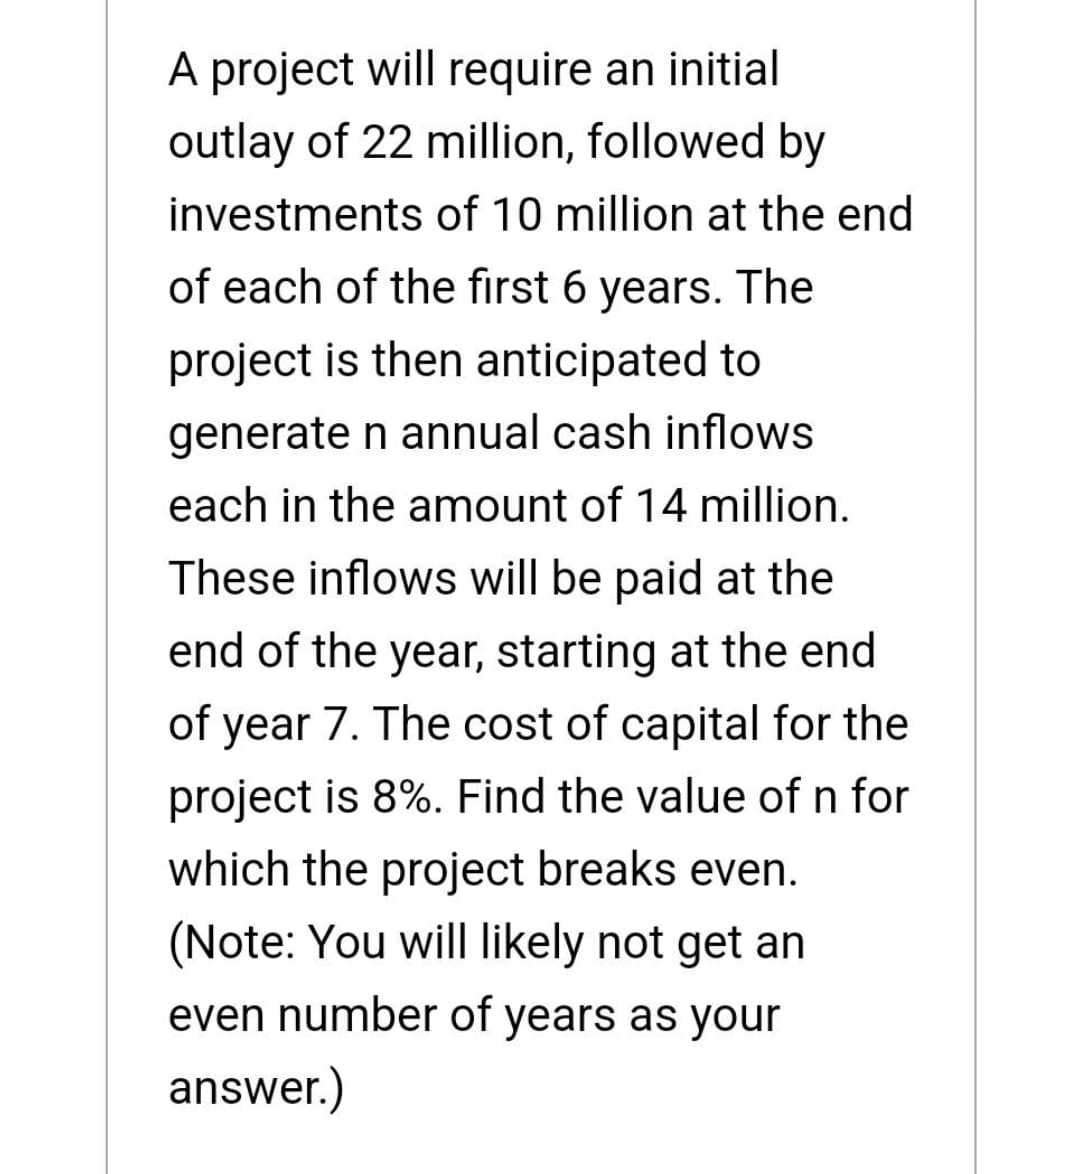 A project will require an initial
outlay of 22 million, followed by
investments of 10 million at the end
of each of the first 6 years. The
project is then anticipated to
generate n annual cash inflows
each in the amount of 14 million.
These inflows will be paid at the
end of the year, starting at the end
of year 7. The cost of capital for the
project is 8%. Find the value of n for
which the project breaks even.
(Note: You will likely not get an
even number of years as your
answer.)
